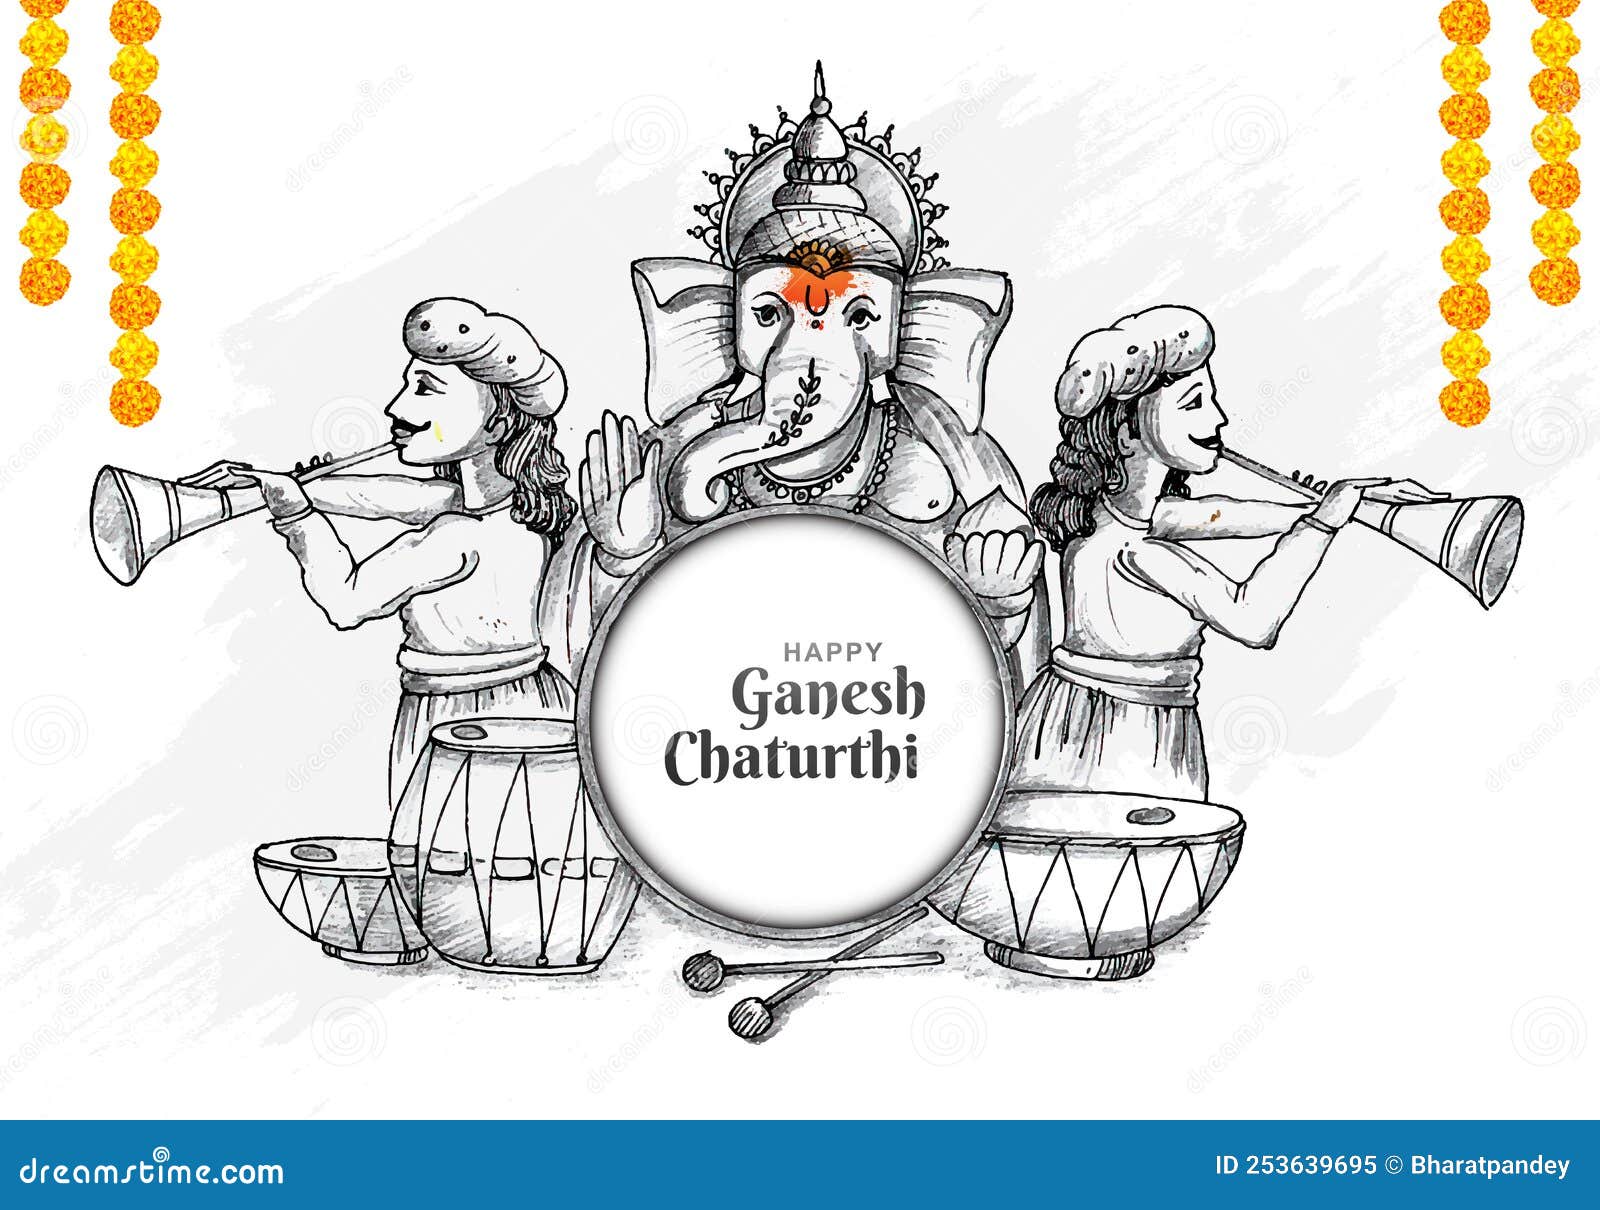 11 Ganesh Chaturthi Paintings & Drawings That Will Leave You Spellbound